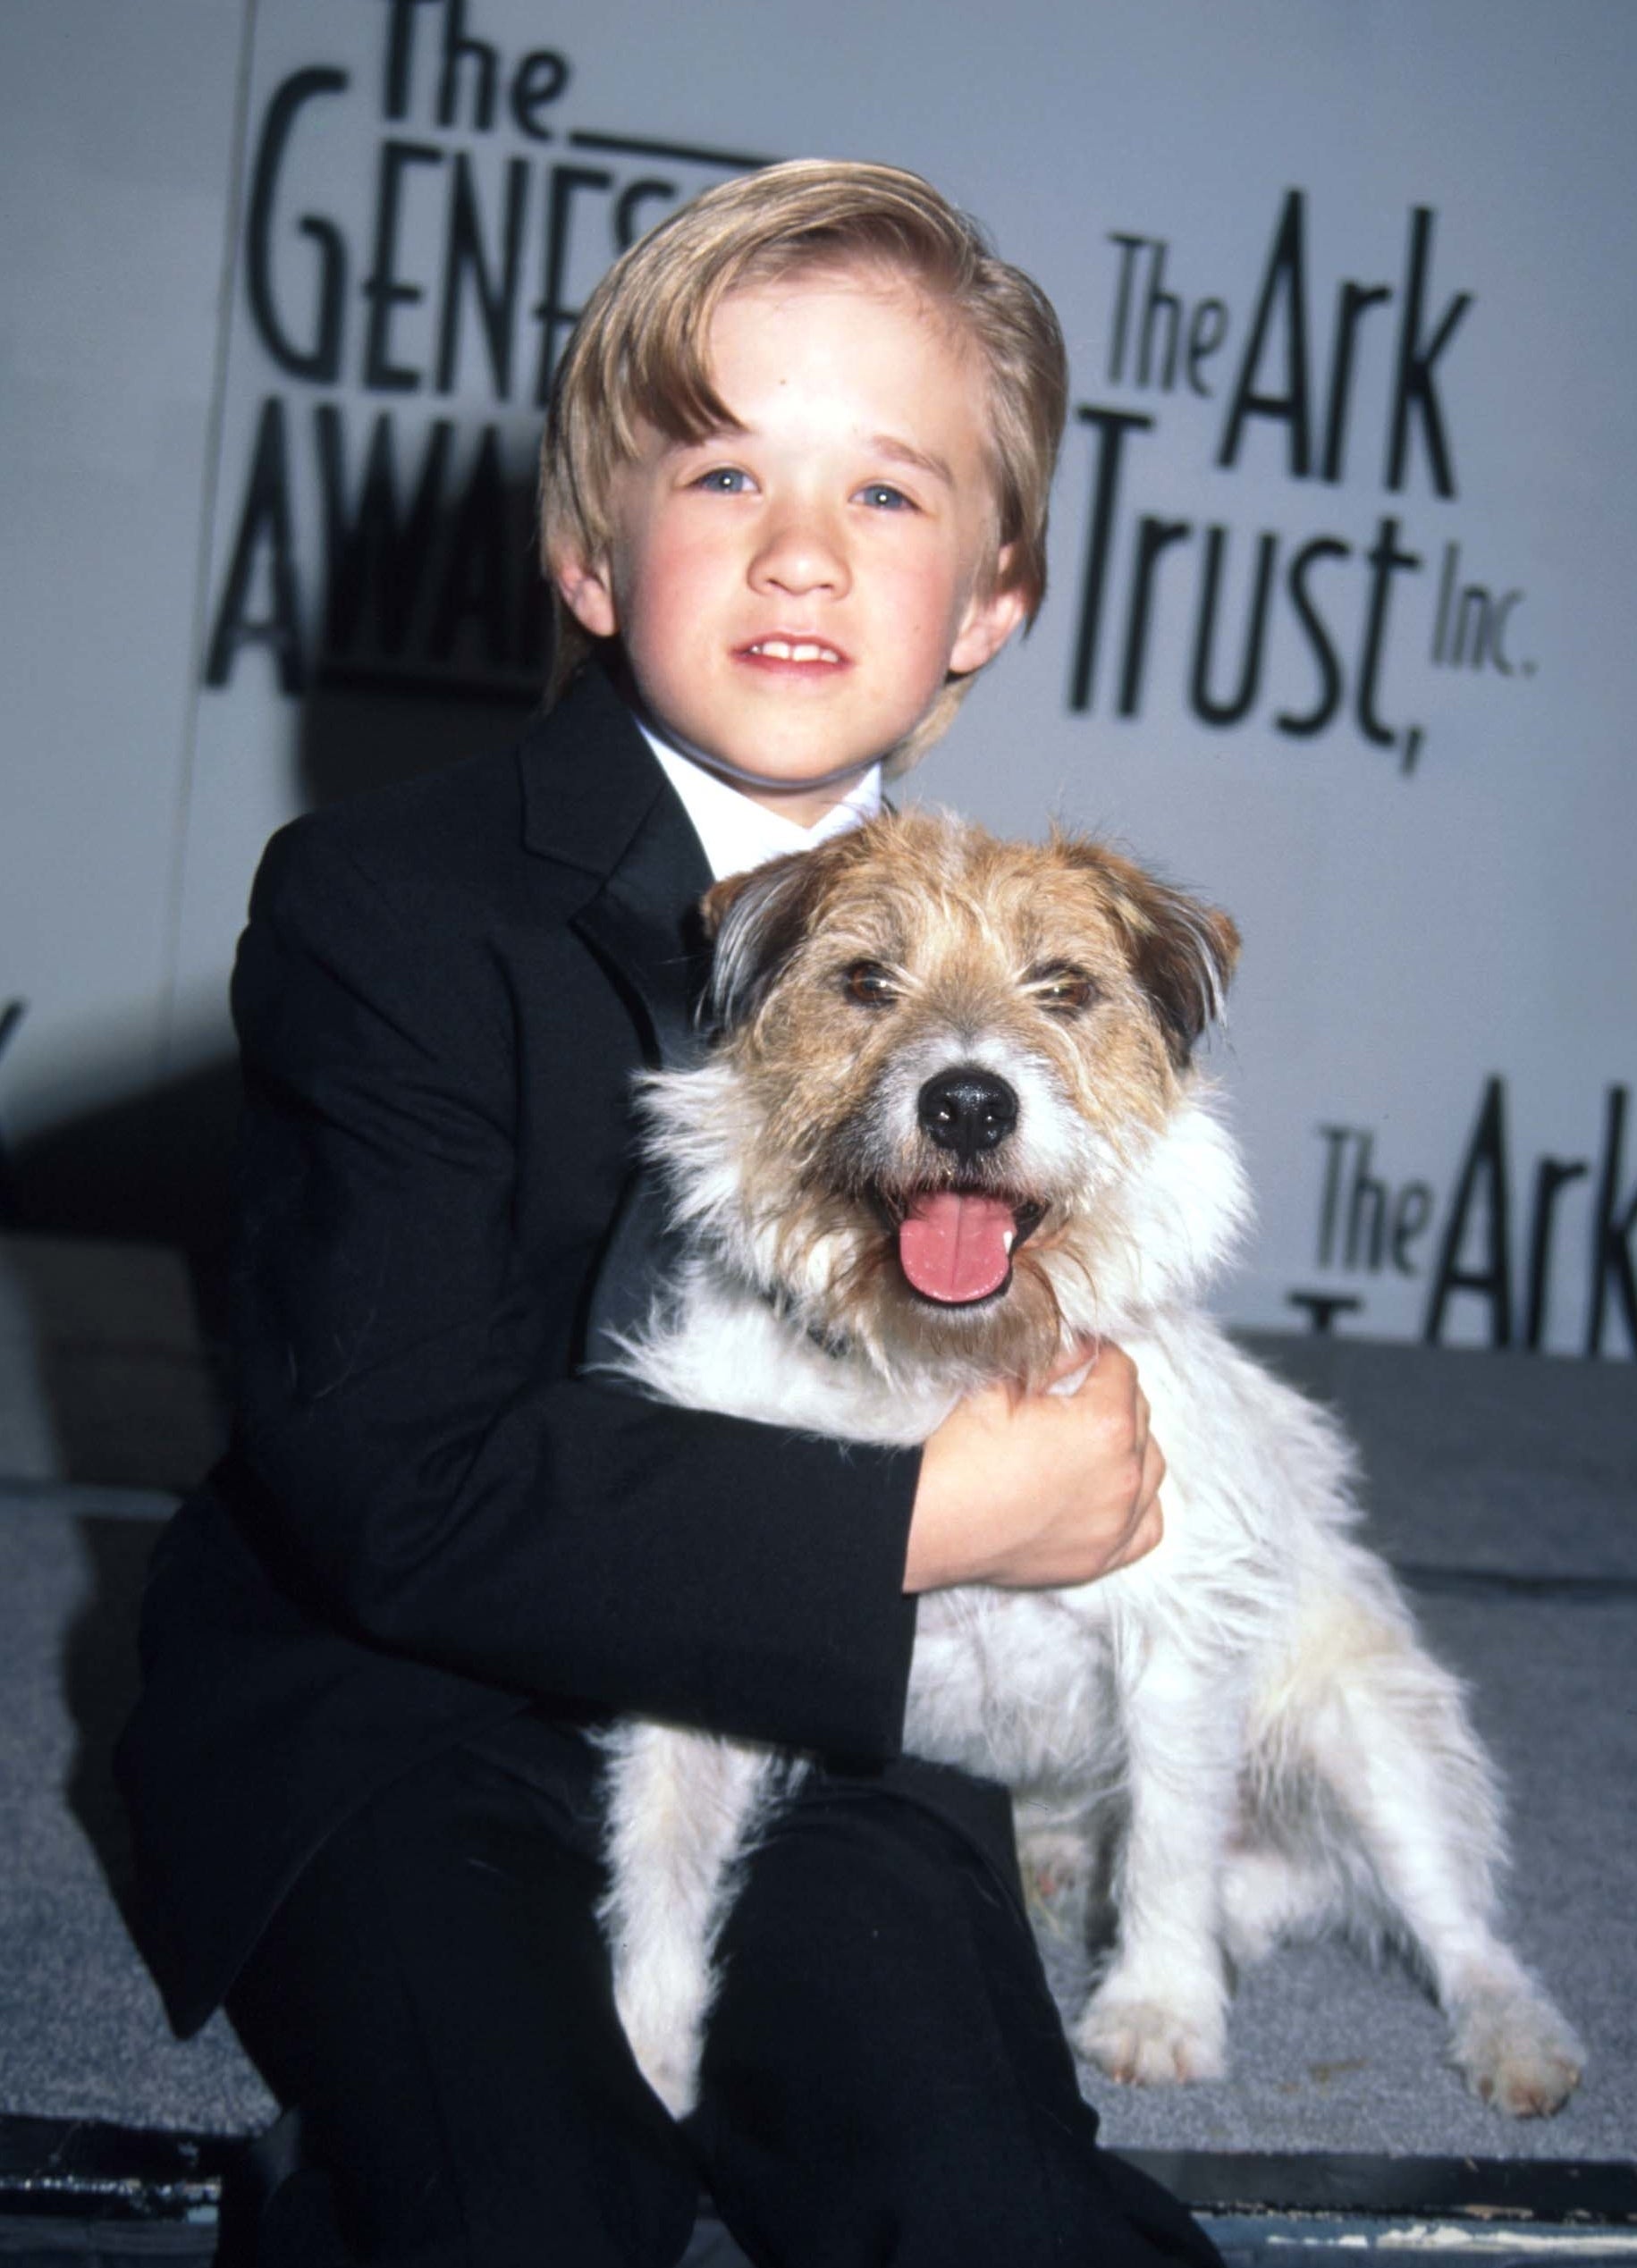 Haley wearing a suit and holding a dog